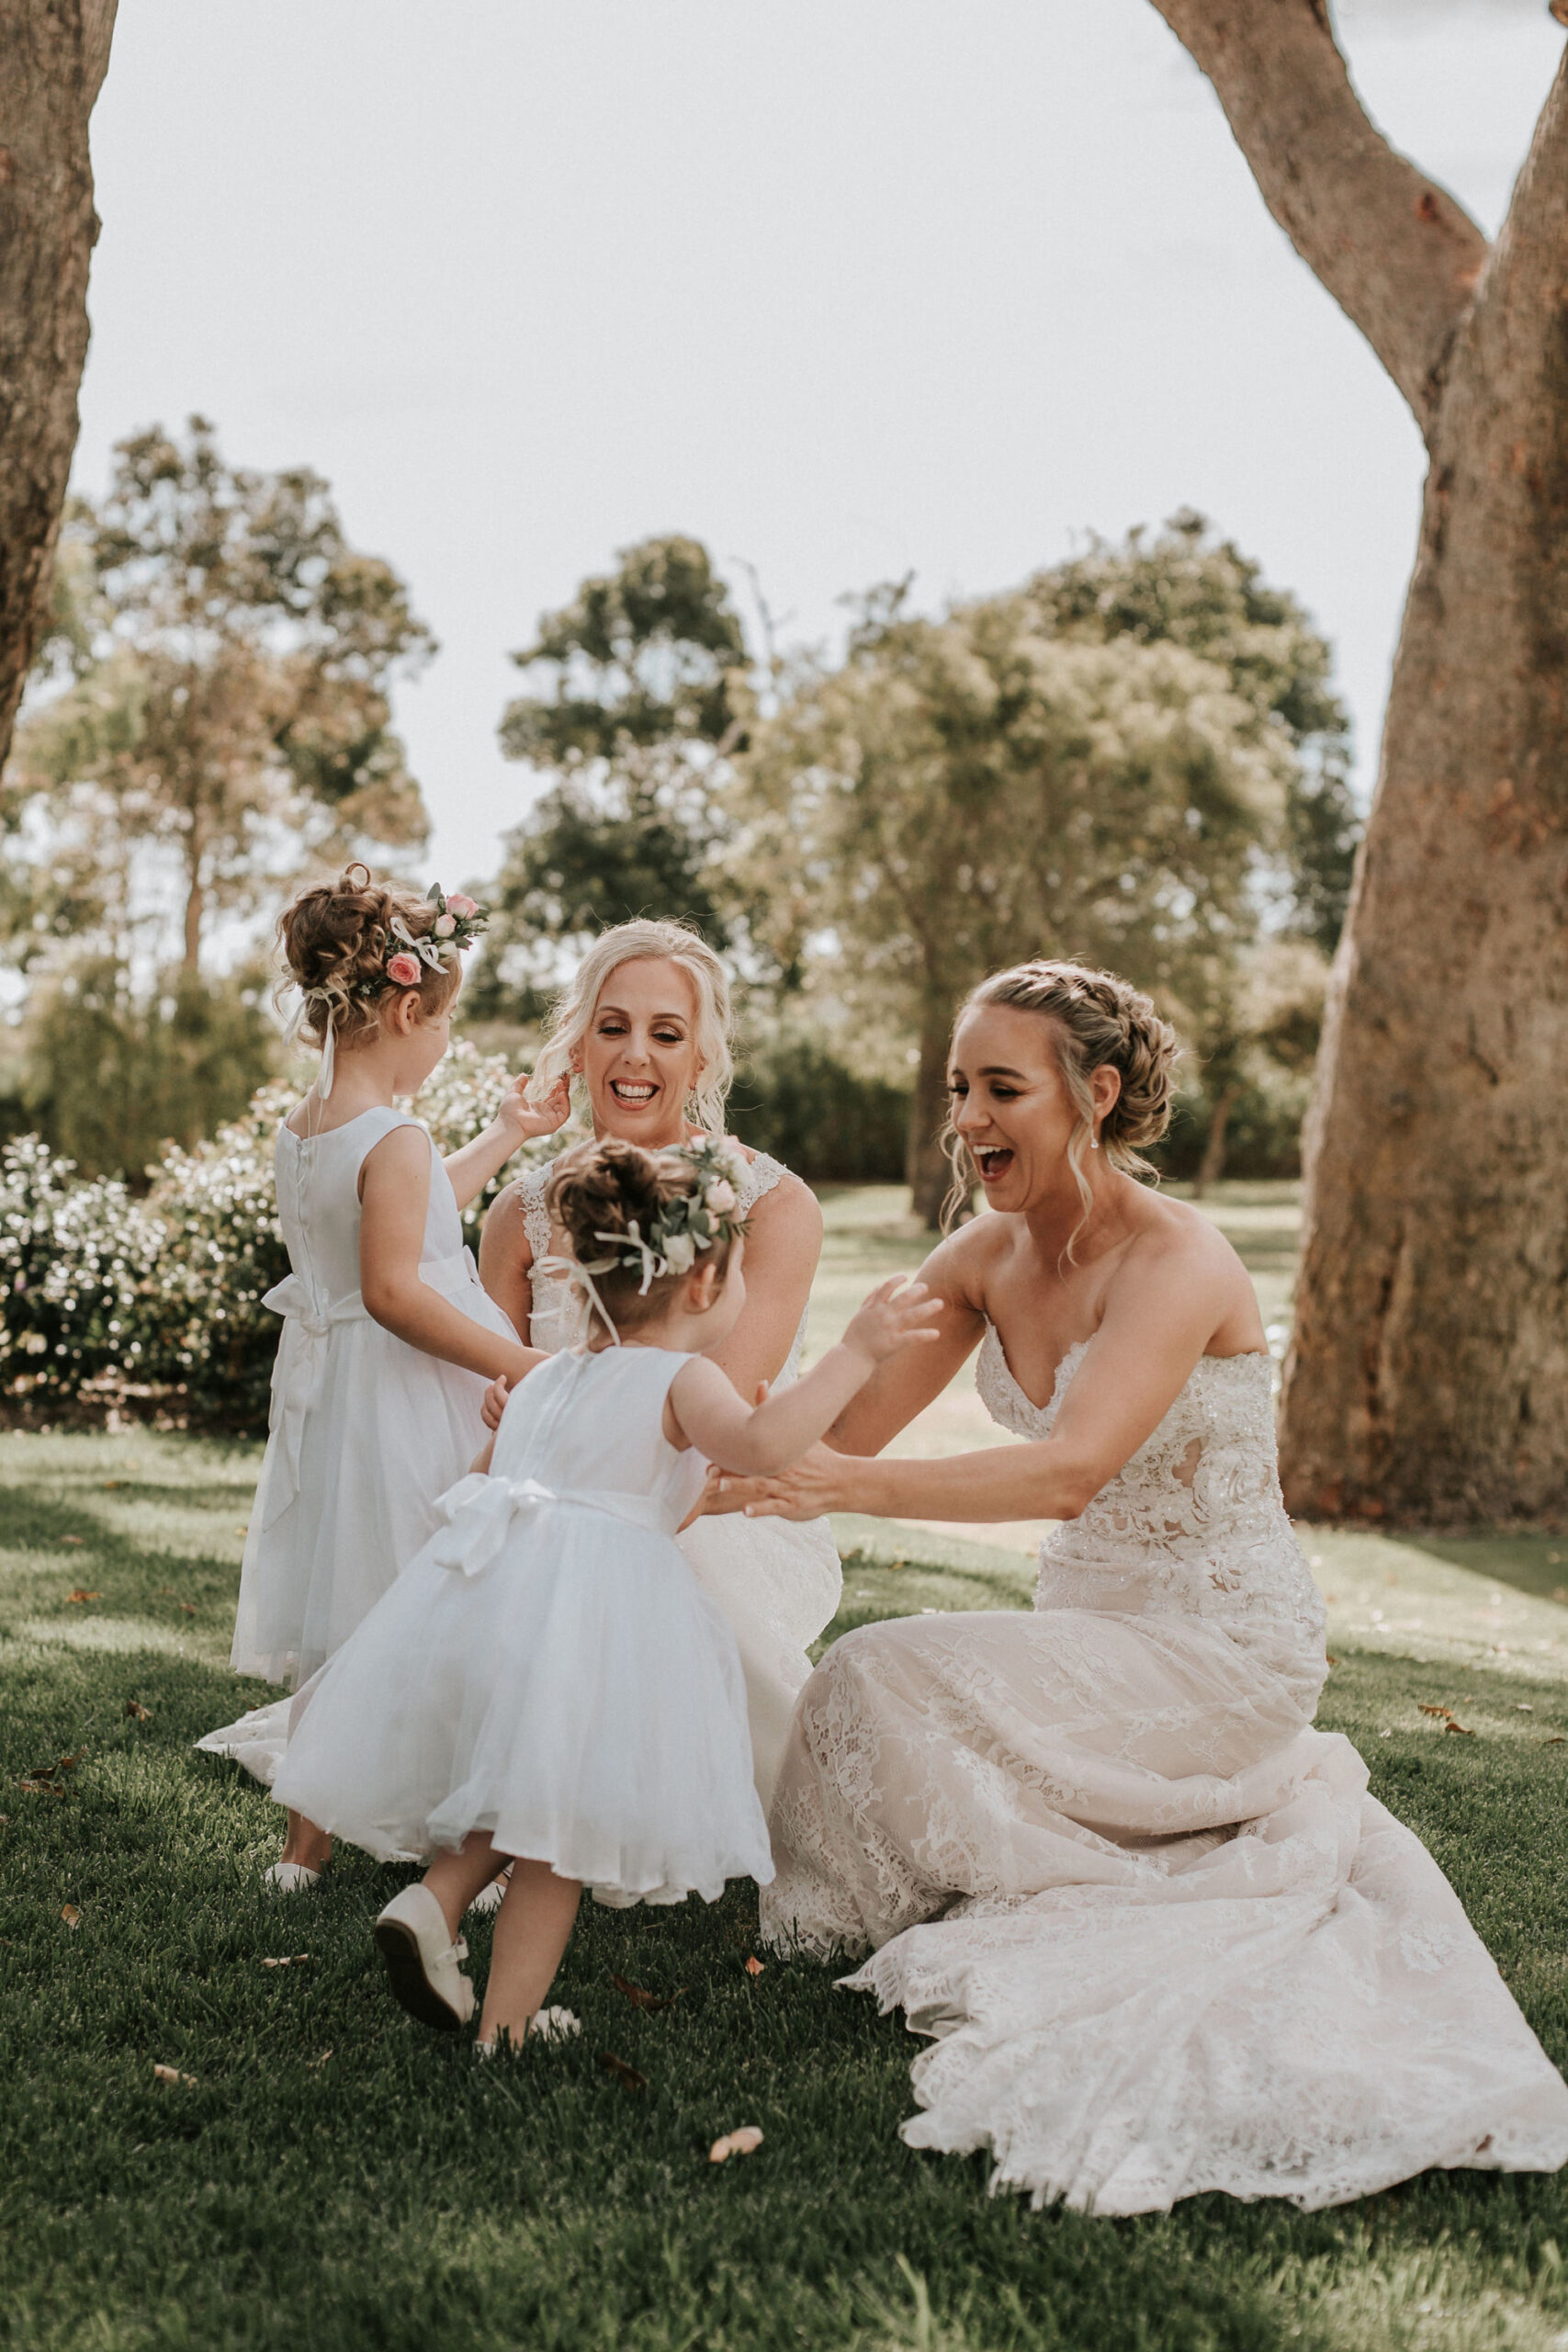 Lisa Vanessa Shannon Stent Images Rustic Relaxed Wedding SBS 013 scaled